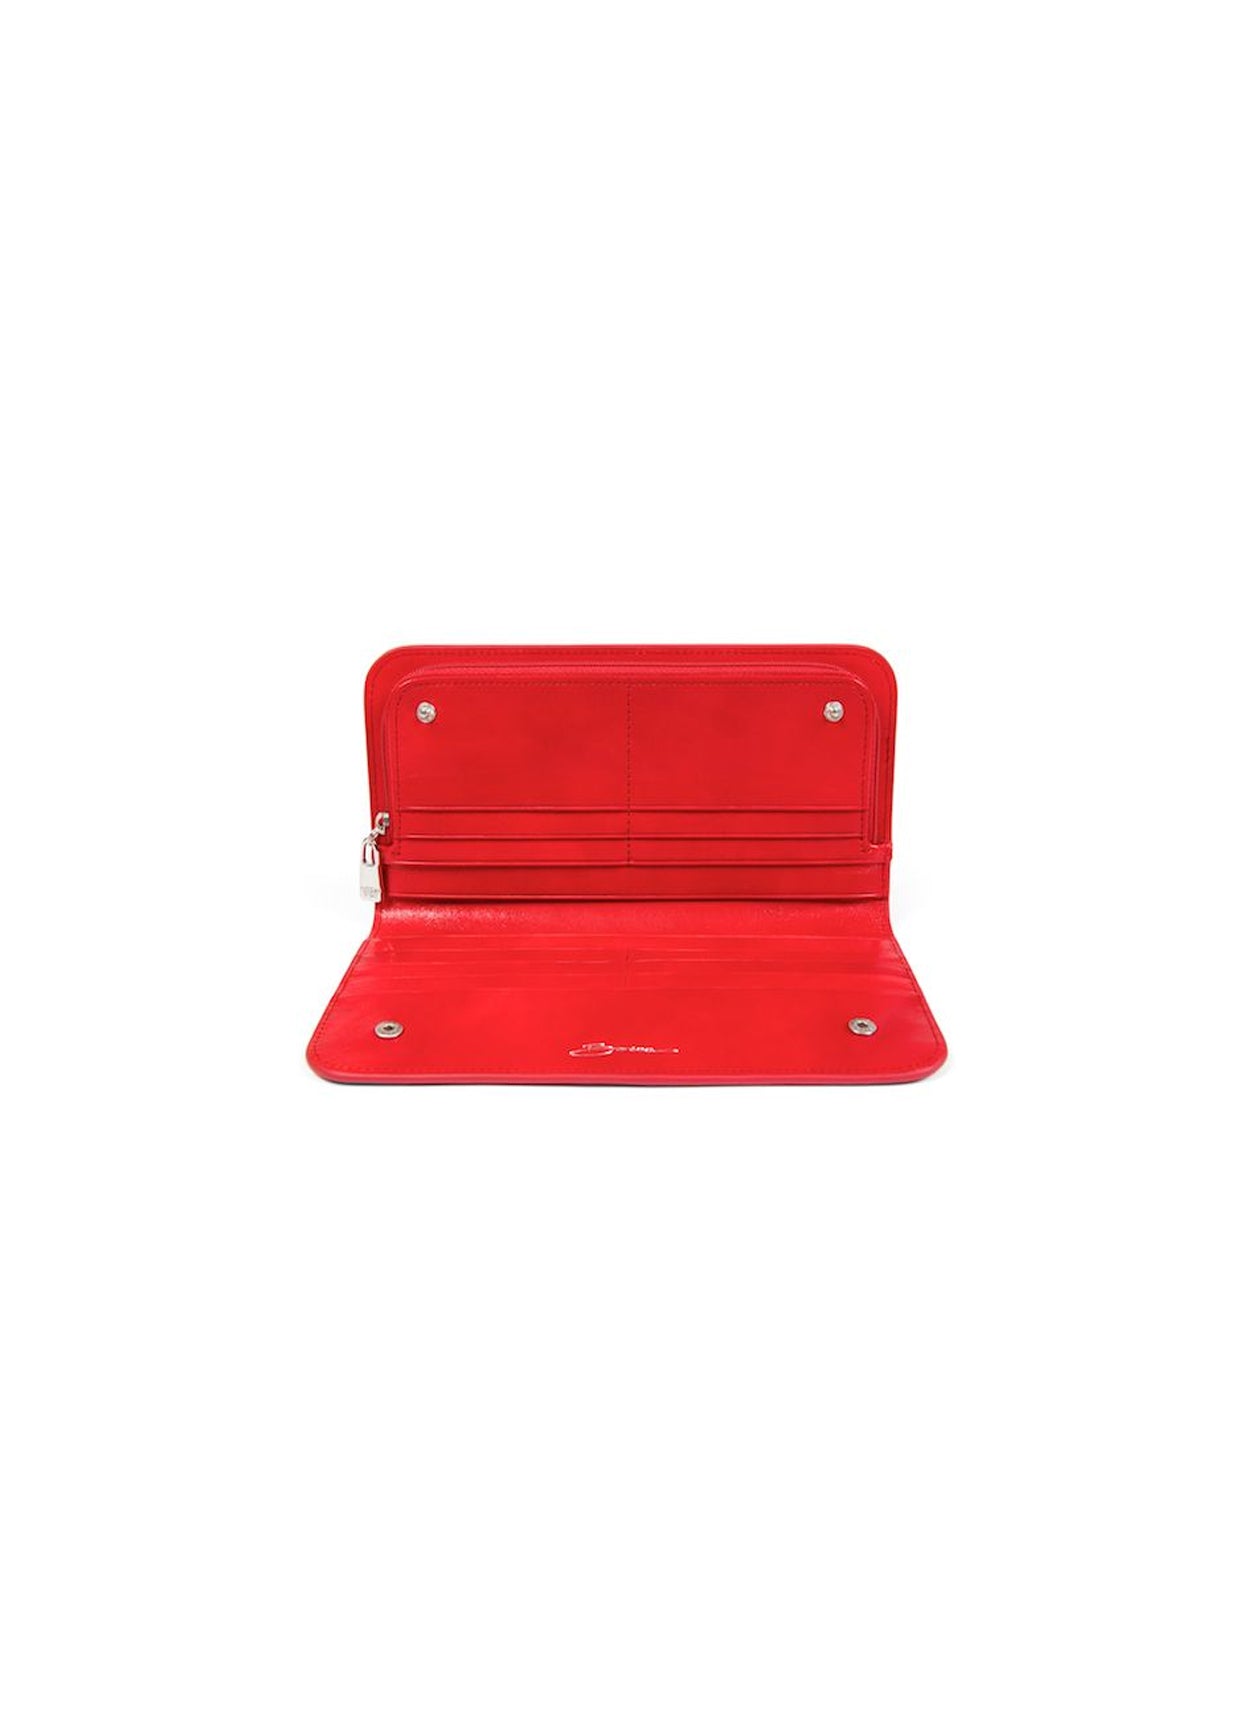 OLD LEATHER LARGE SNAP CLUTCH - RED